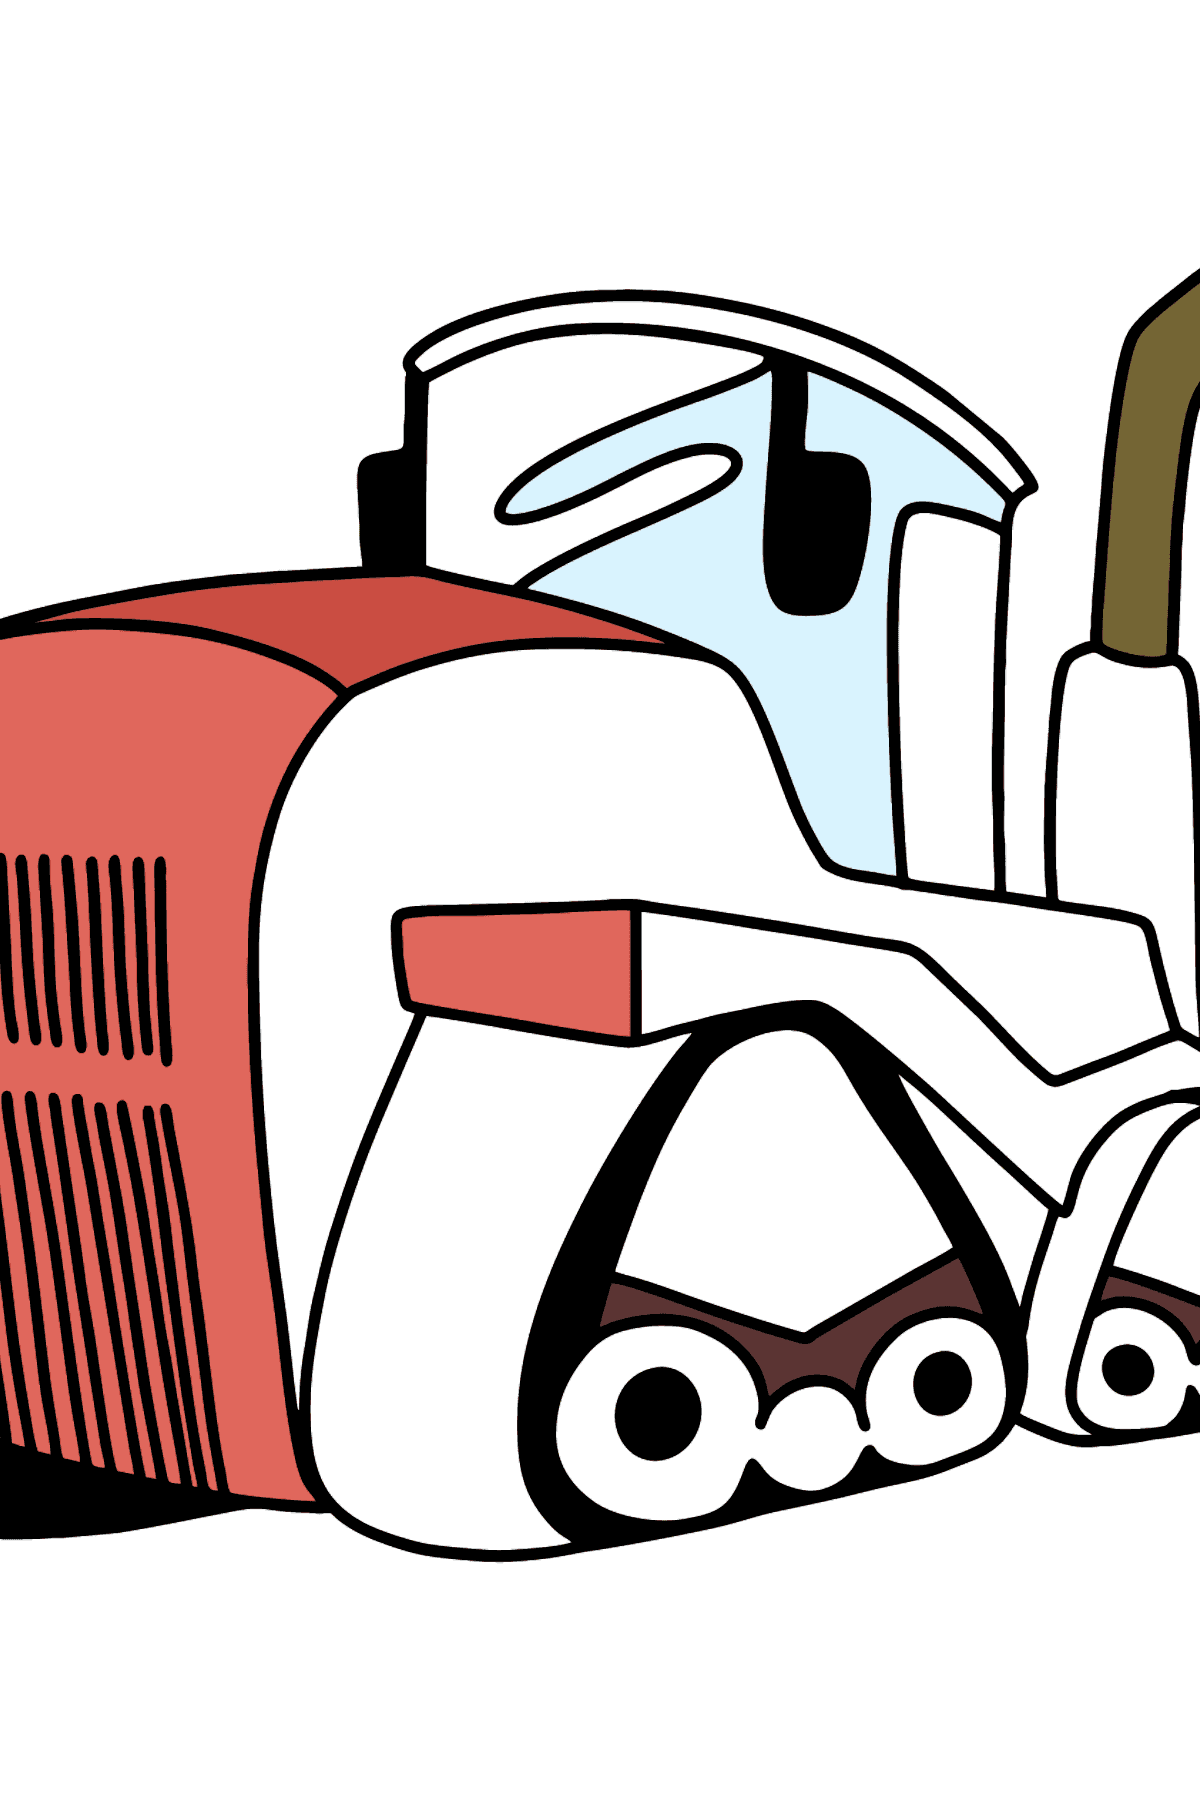 Big Heavy Tractor coloring page - Coloring Pages for Kids